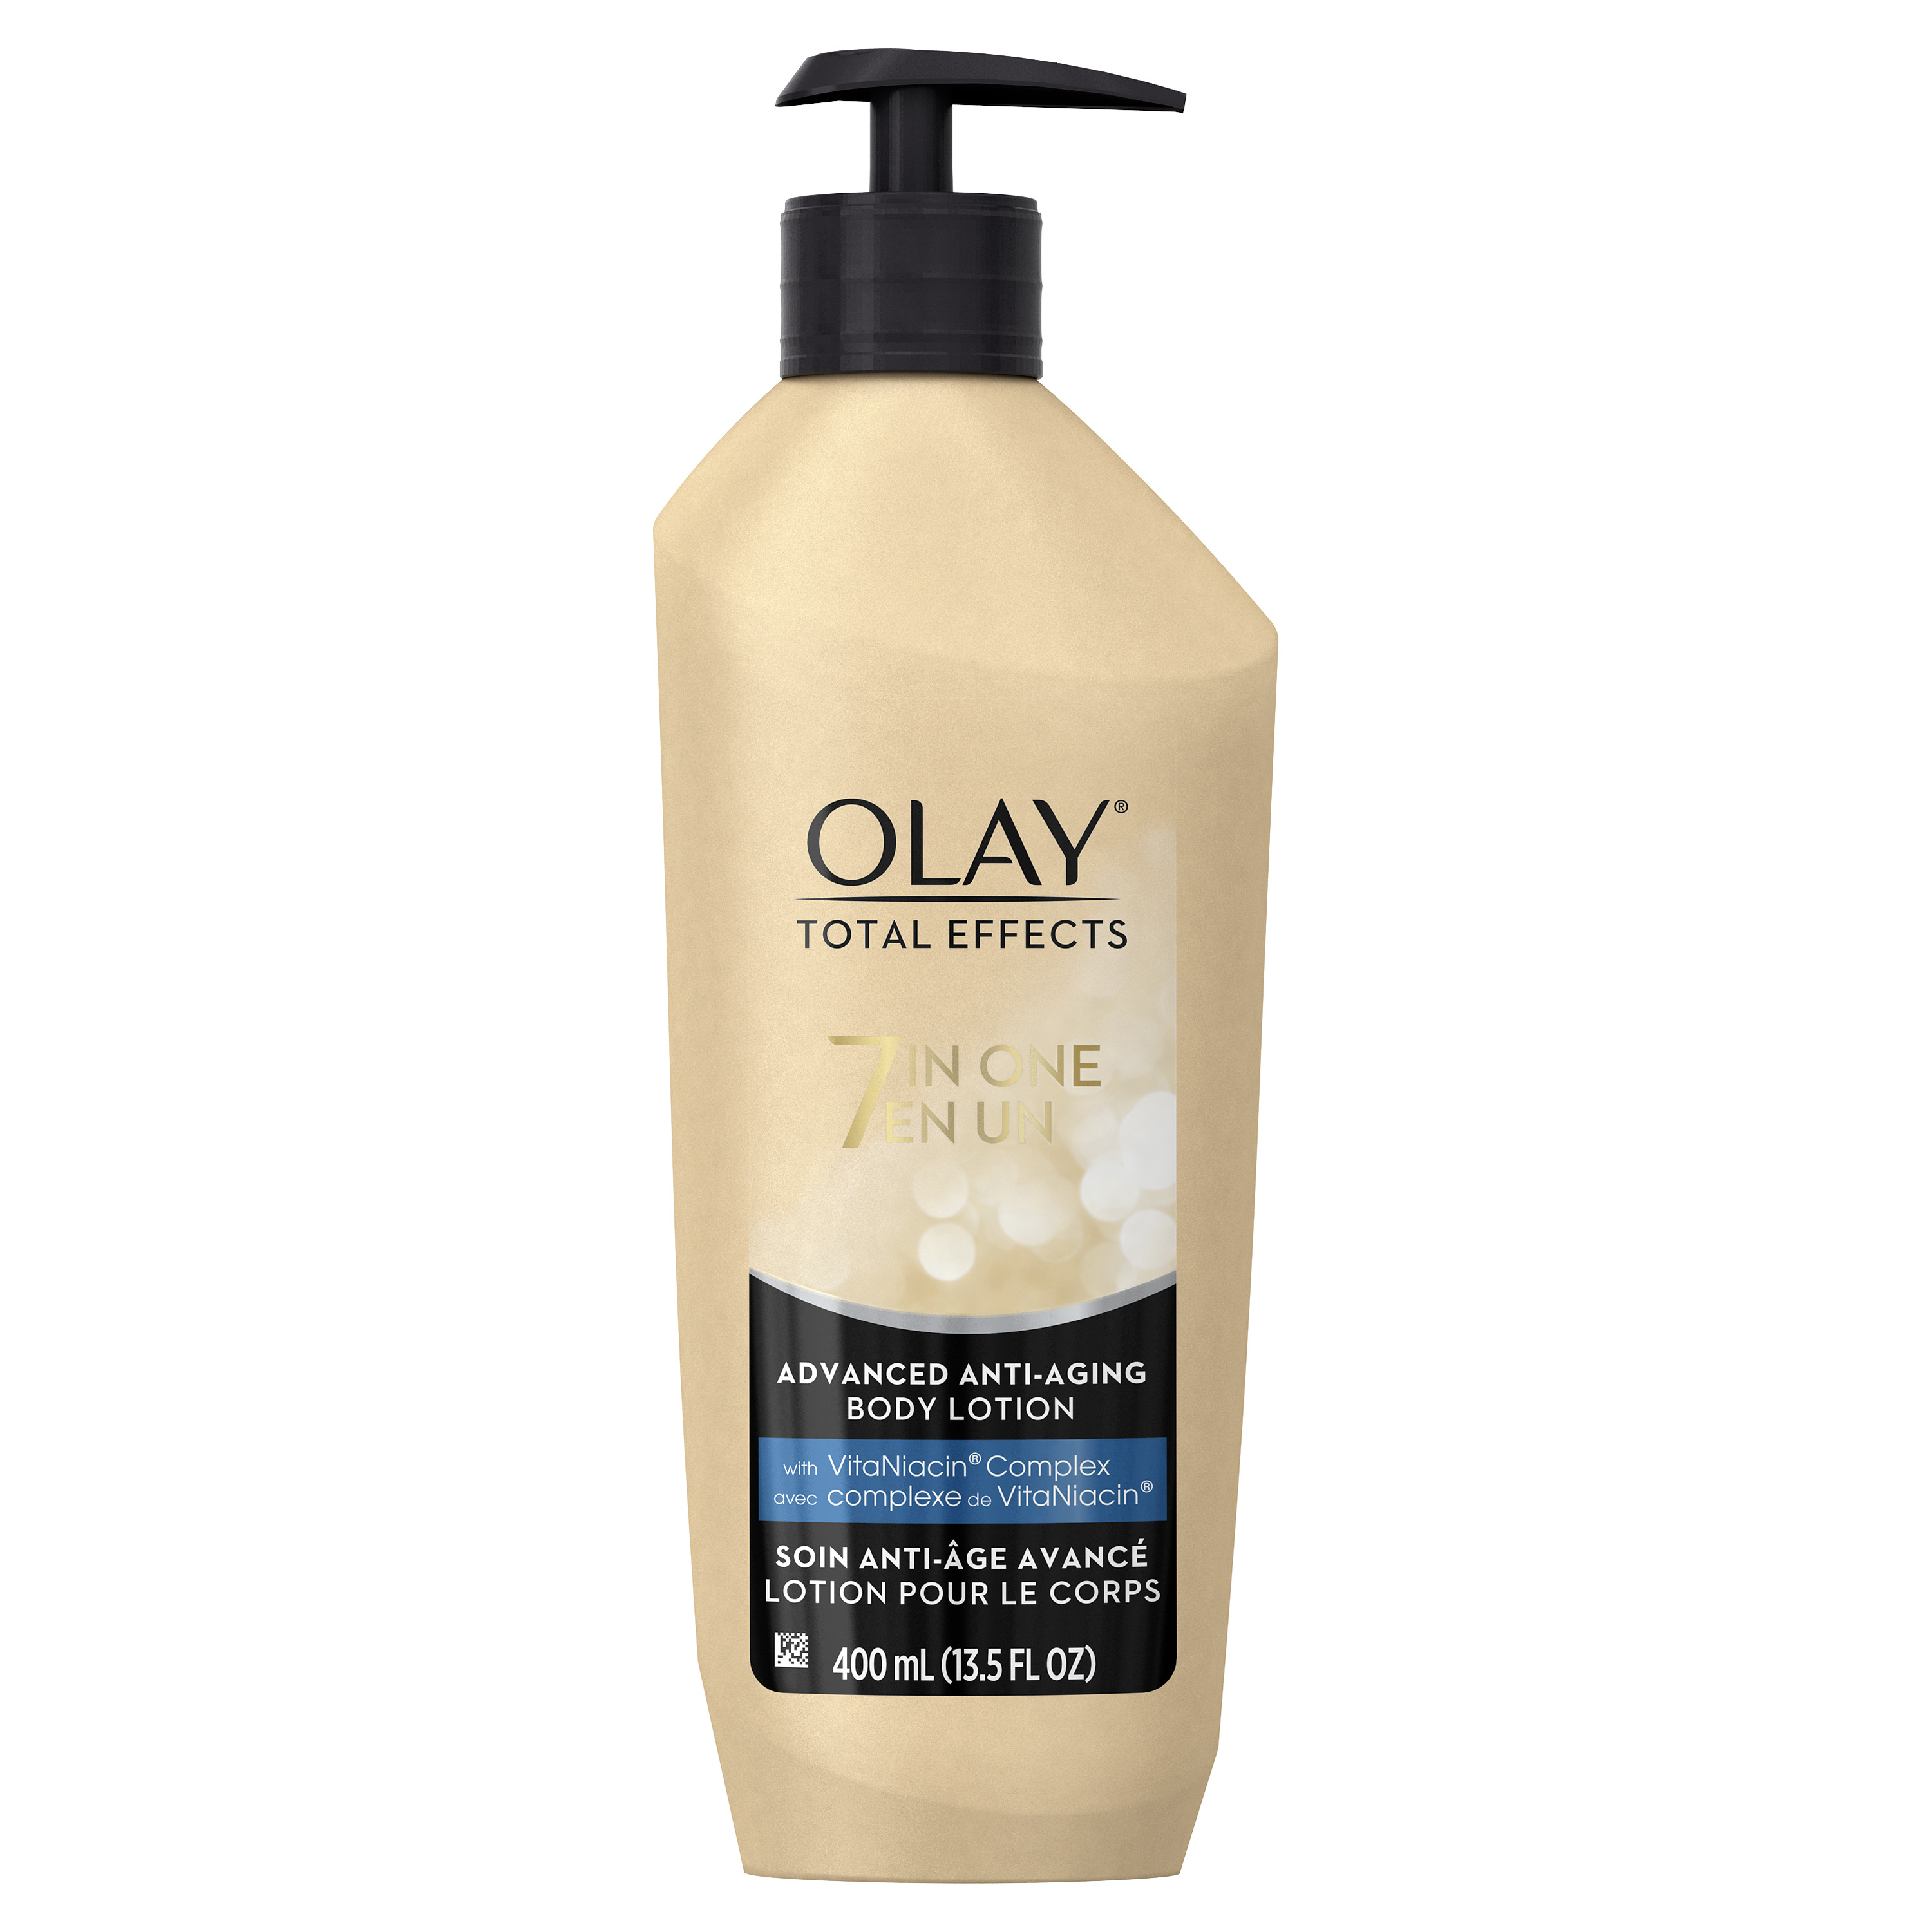 Olay Total Effects Advanced Anti-Aging Body Lotion, 13.5 fl. Oz. - image 1 of 10